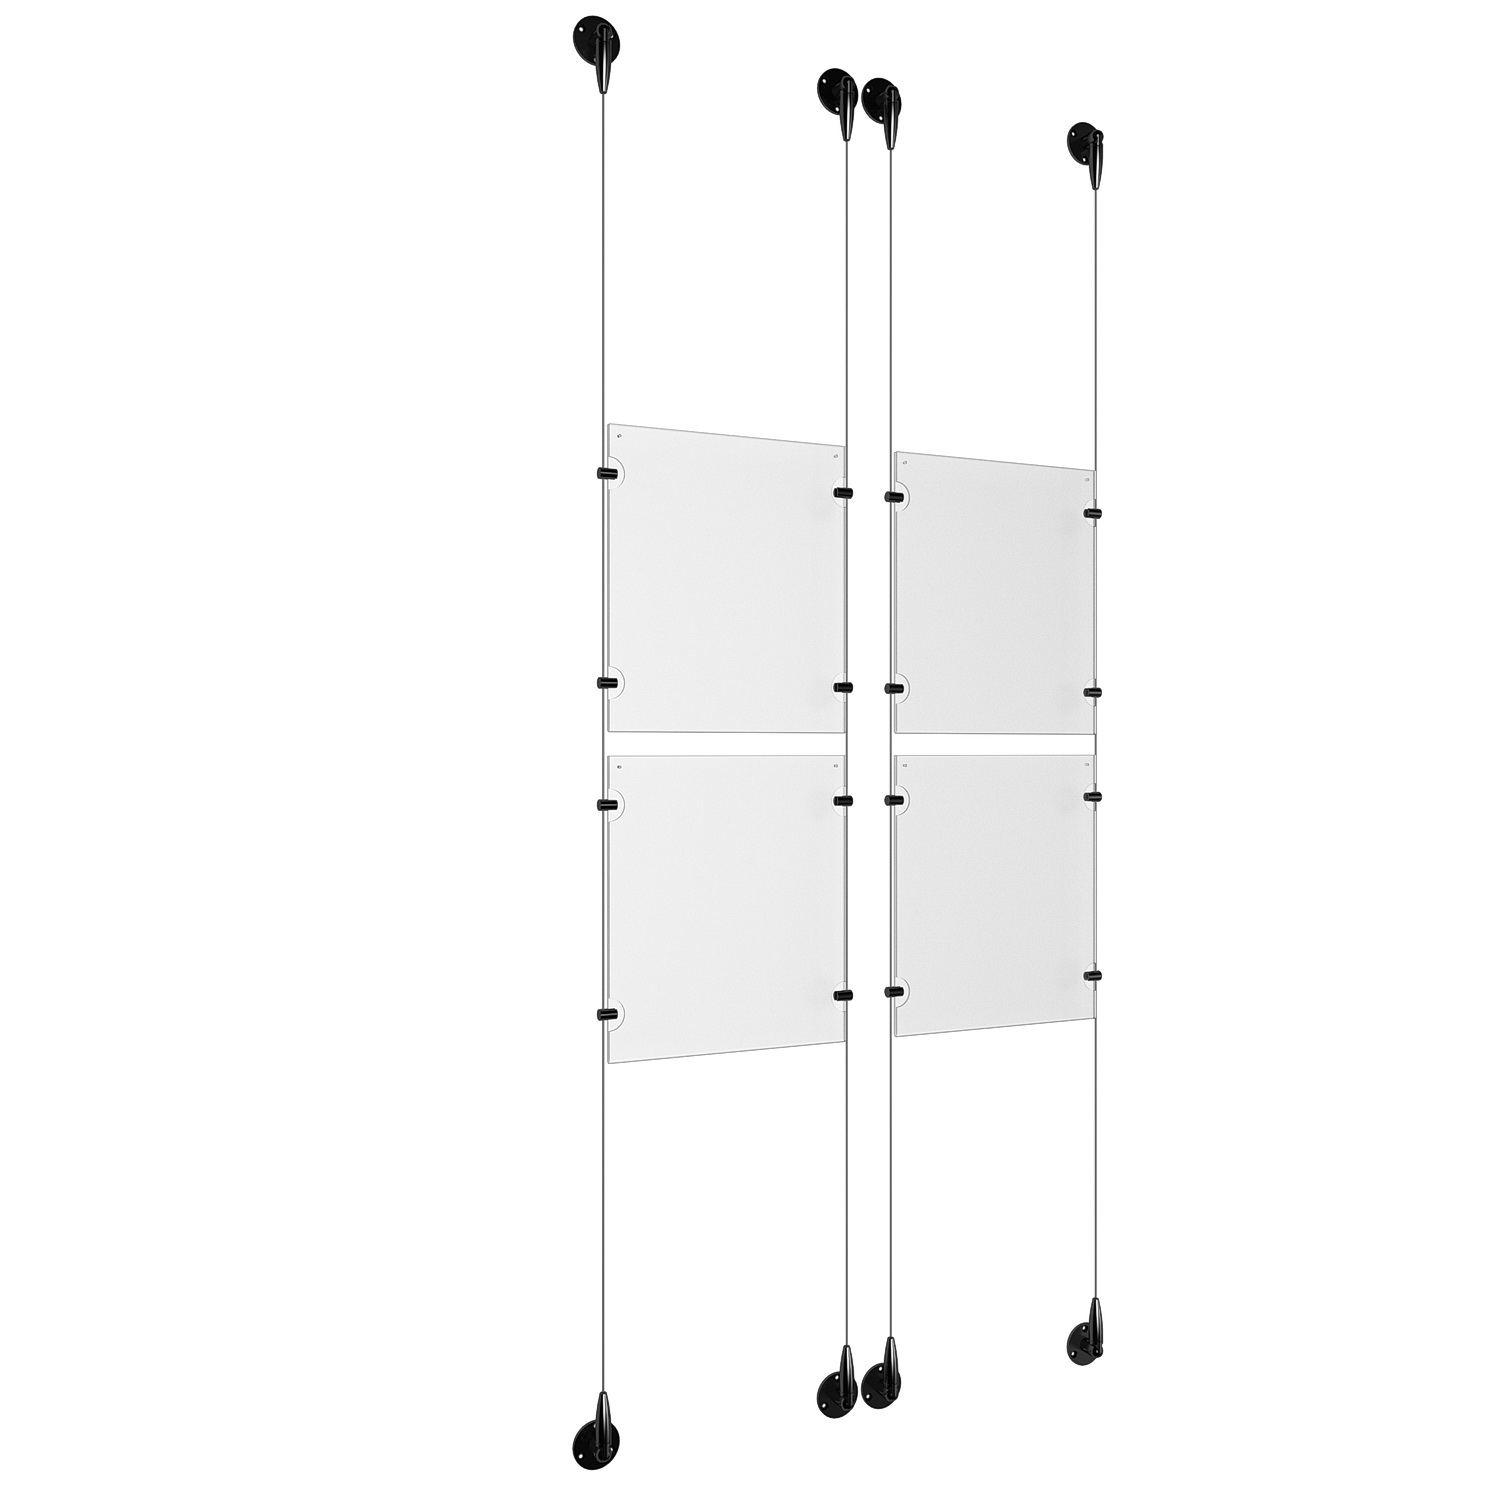 (4) 8-1/2'' Width x 11'' Height Clear Acrylic Frame & (4) Aluminum Matte Black Adjustable Angle Signature 1/8'' Diameter Cable Systems with (16) Single-Sided Panel Grippers